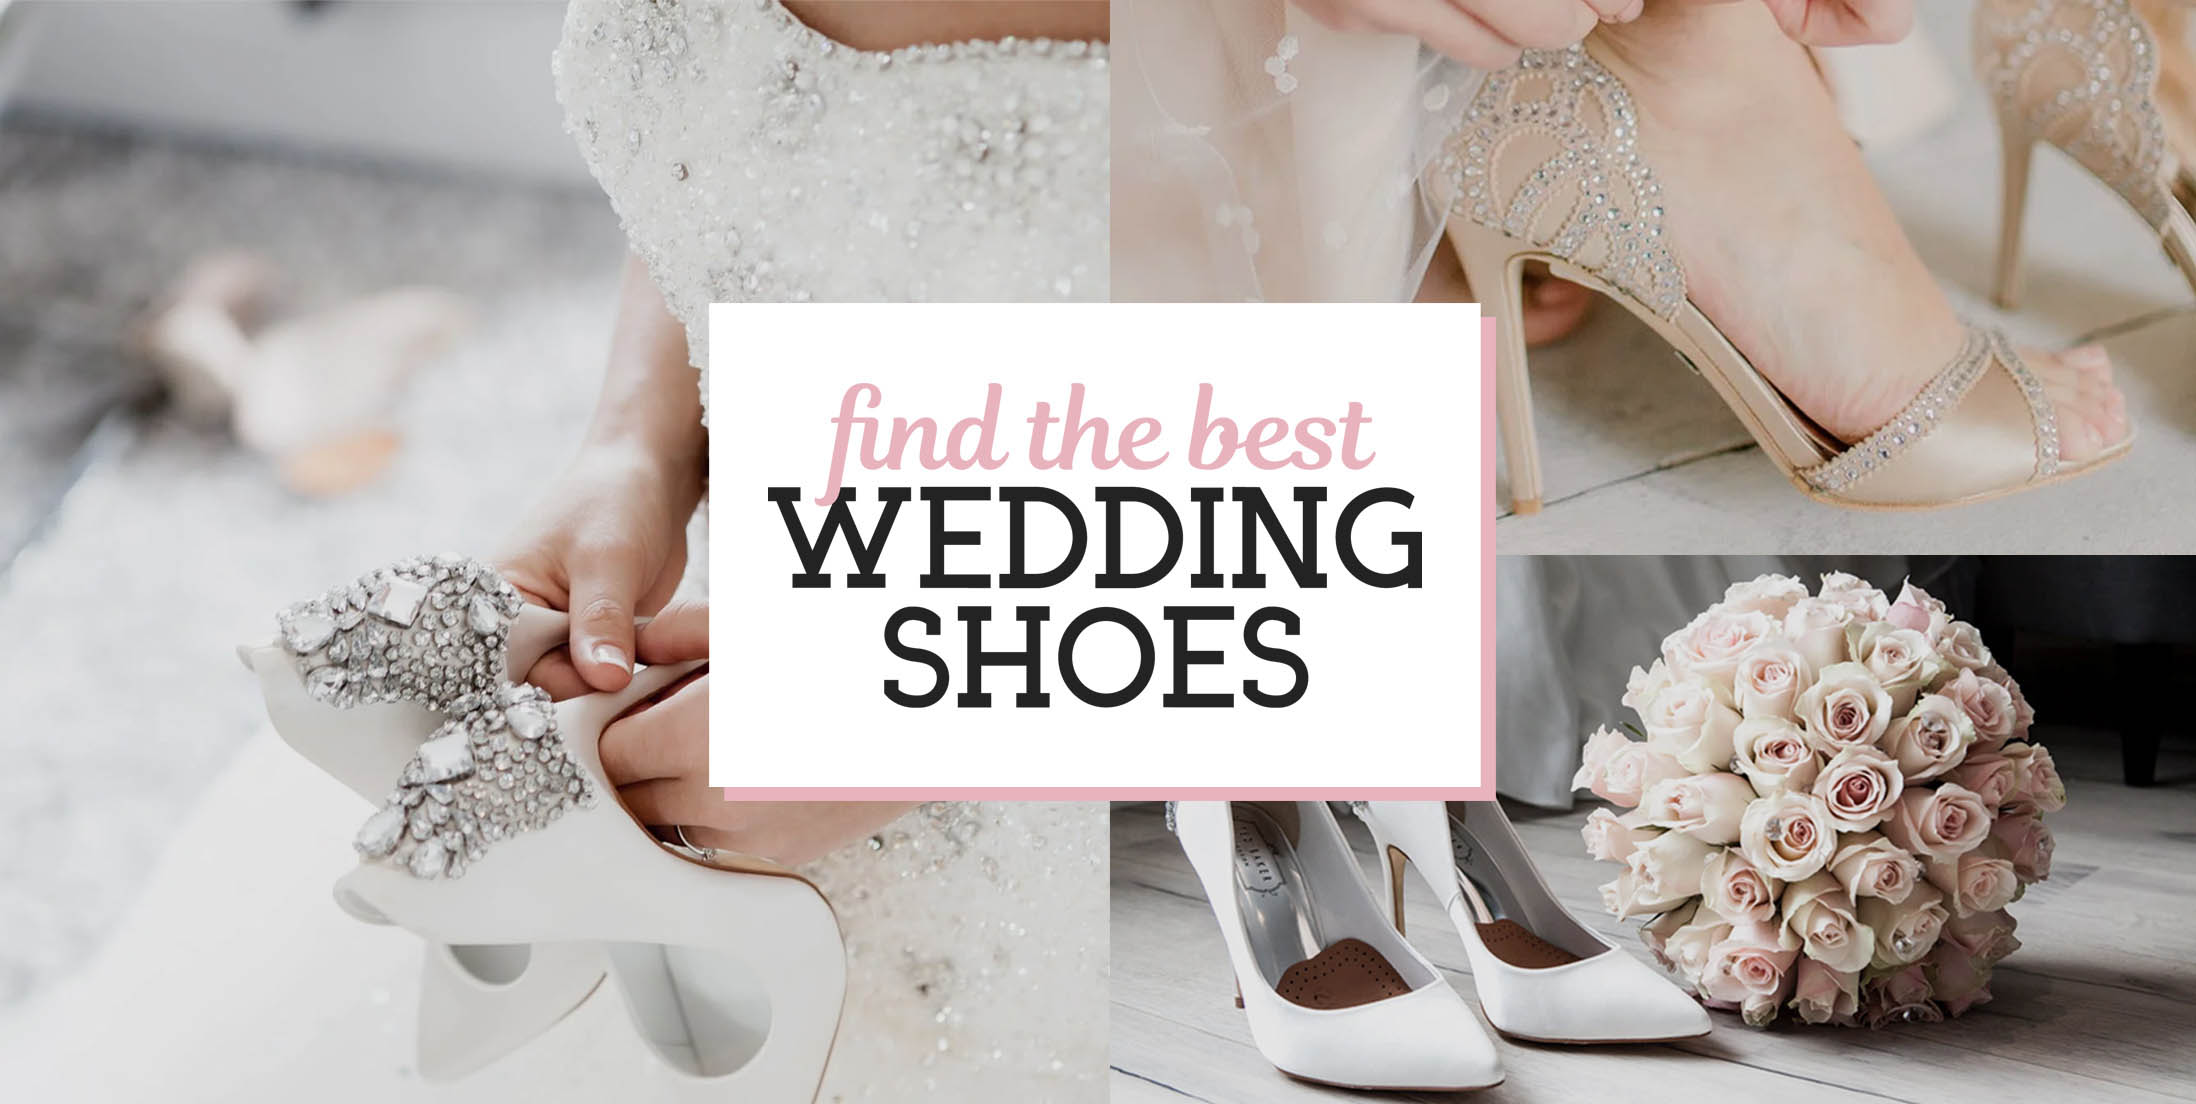 How to Find the Best Wedding Shoes for the Bride